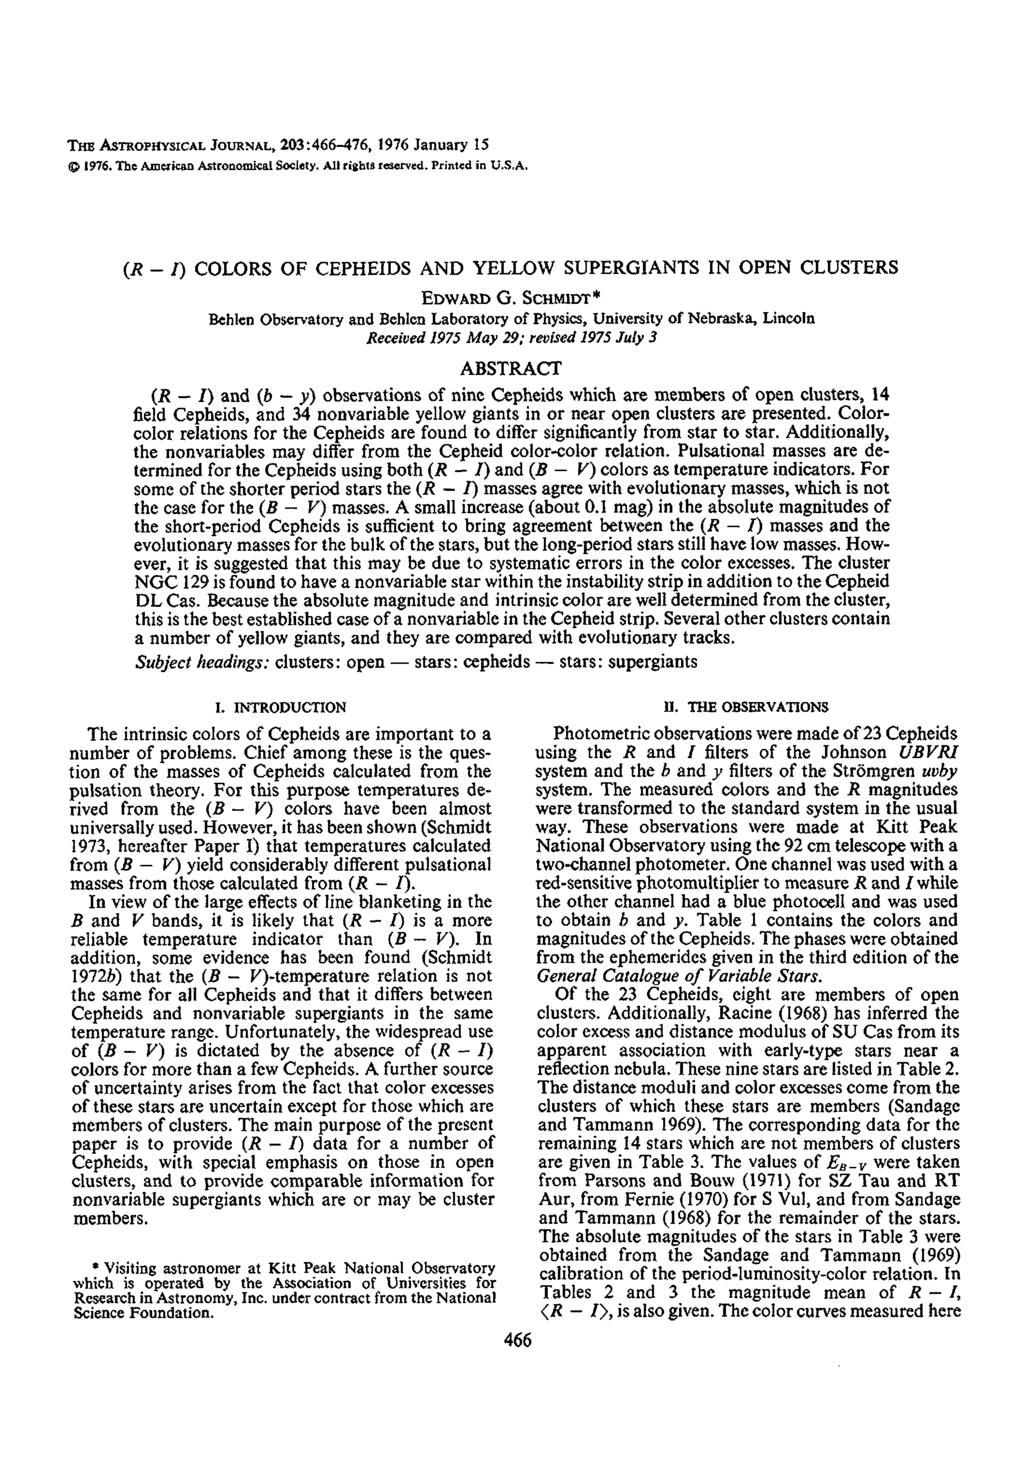 Tm ASTROPHYSICAL JOURNAL, 203:466-476, 1976 January 15 0 1976. The Amuican Astronomicsl Society. All rights rwed. Printed in U.S.A. (R - I) COLORS OF CEPHEIDS AND YELLOW SUPERGIANTS IN OPEN CLUSTERS EDWARD G.